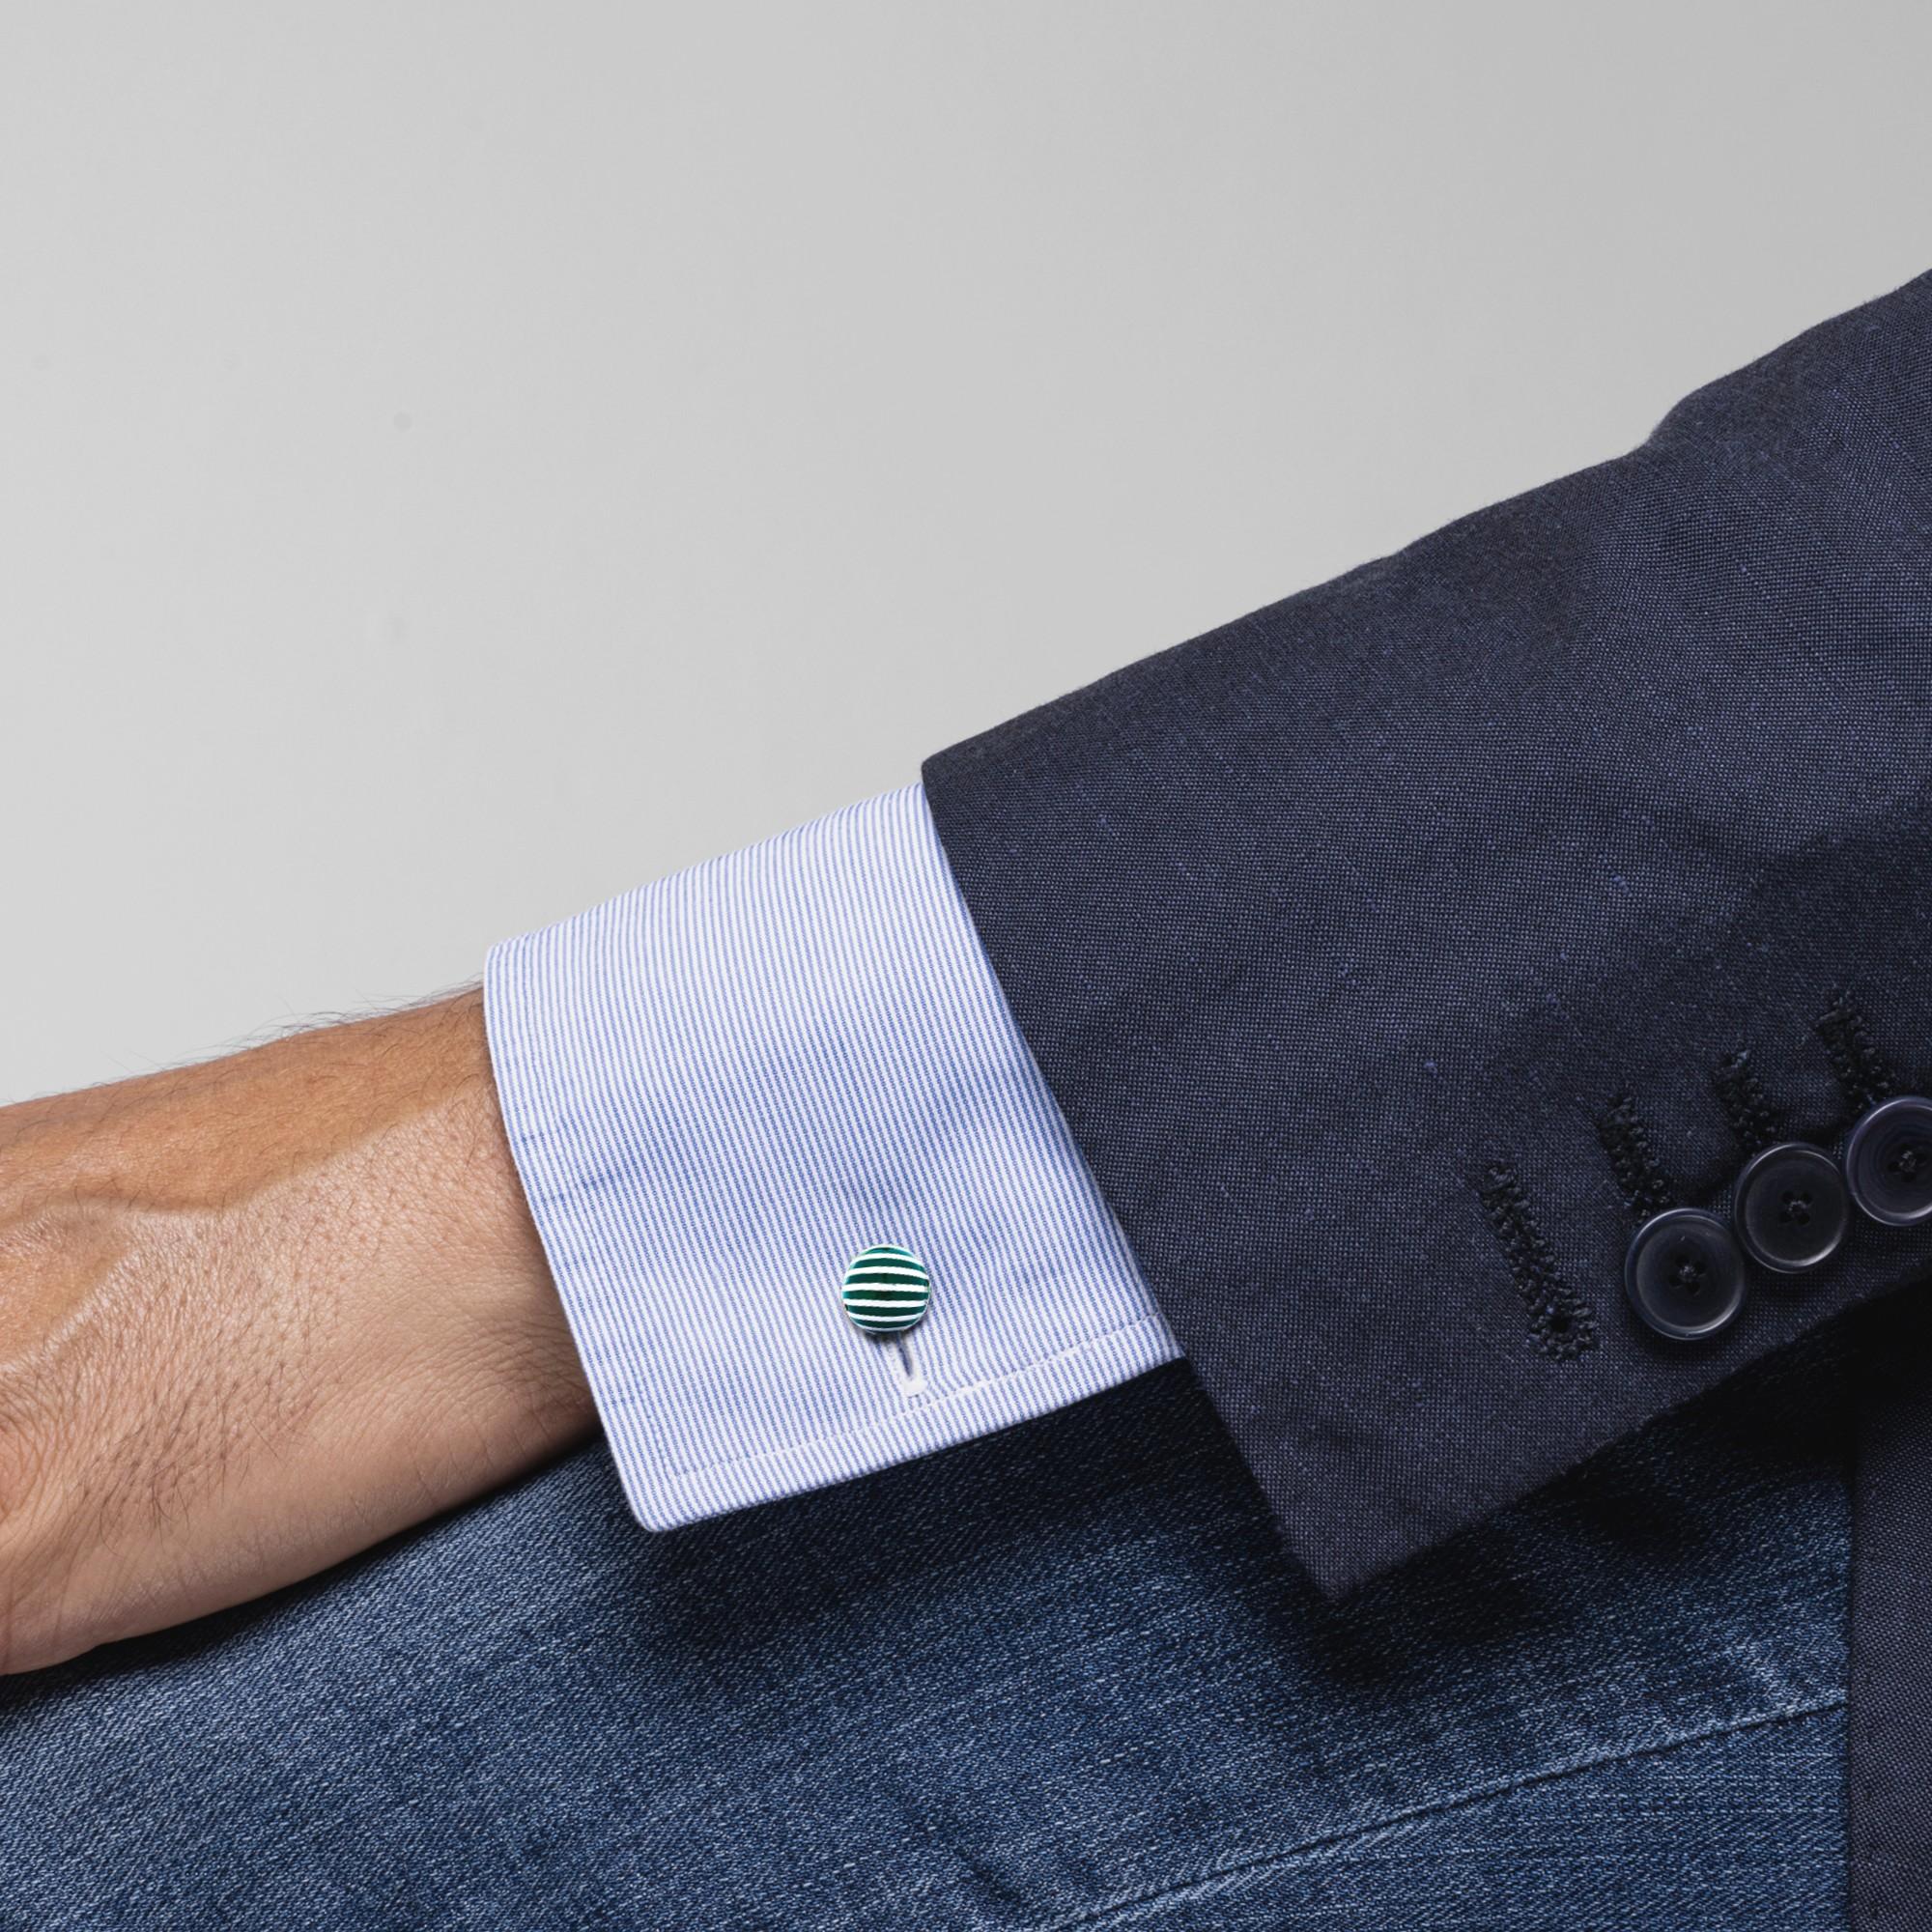 Alex Jona design collection, hand crafted in Italy, sterling silver green enamel stripe cufflinks. Marked Alex Jona-925. These cufflinks feature a T-Bar fastening, aiding in easy use and confidence that they'll stay secured to your shirt. 
Alex Jona